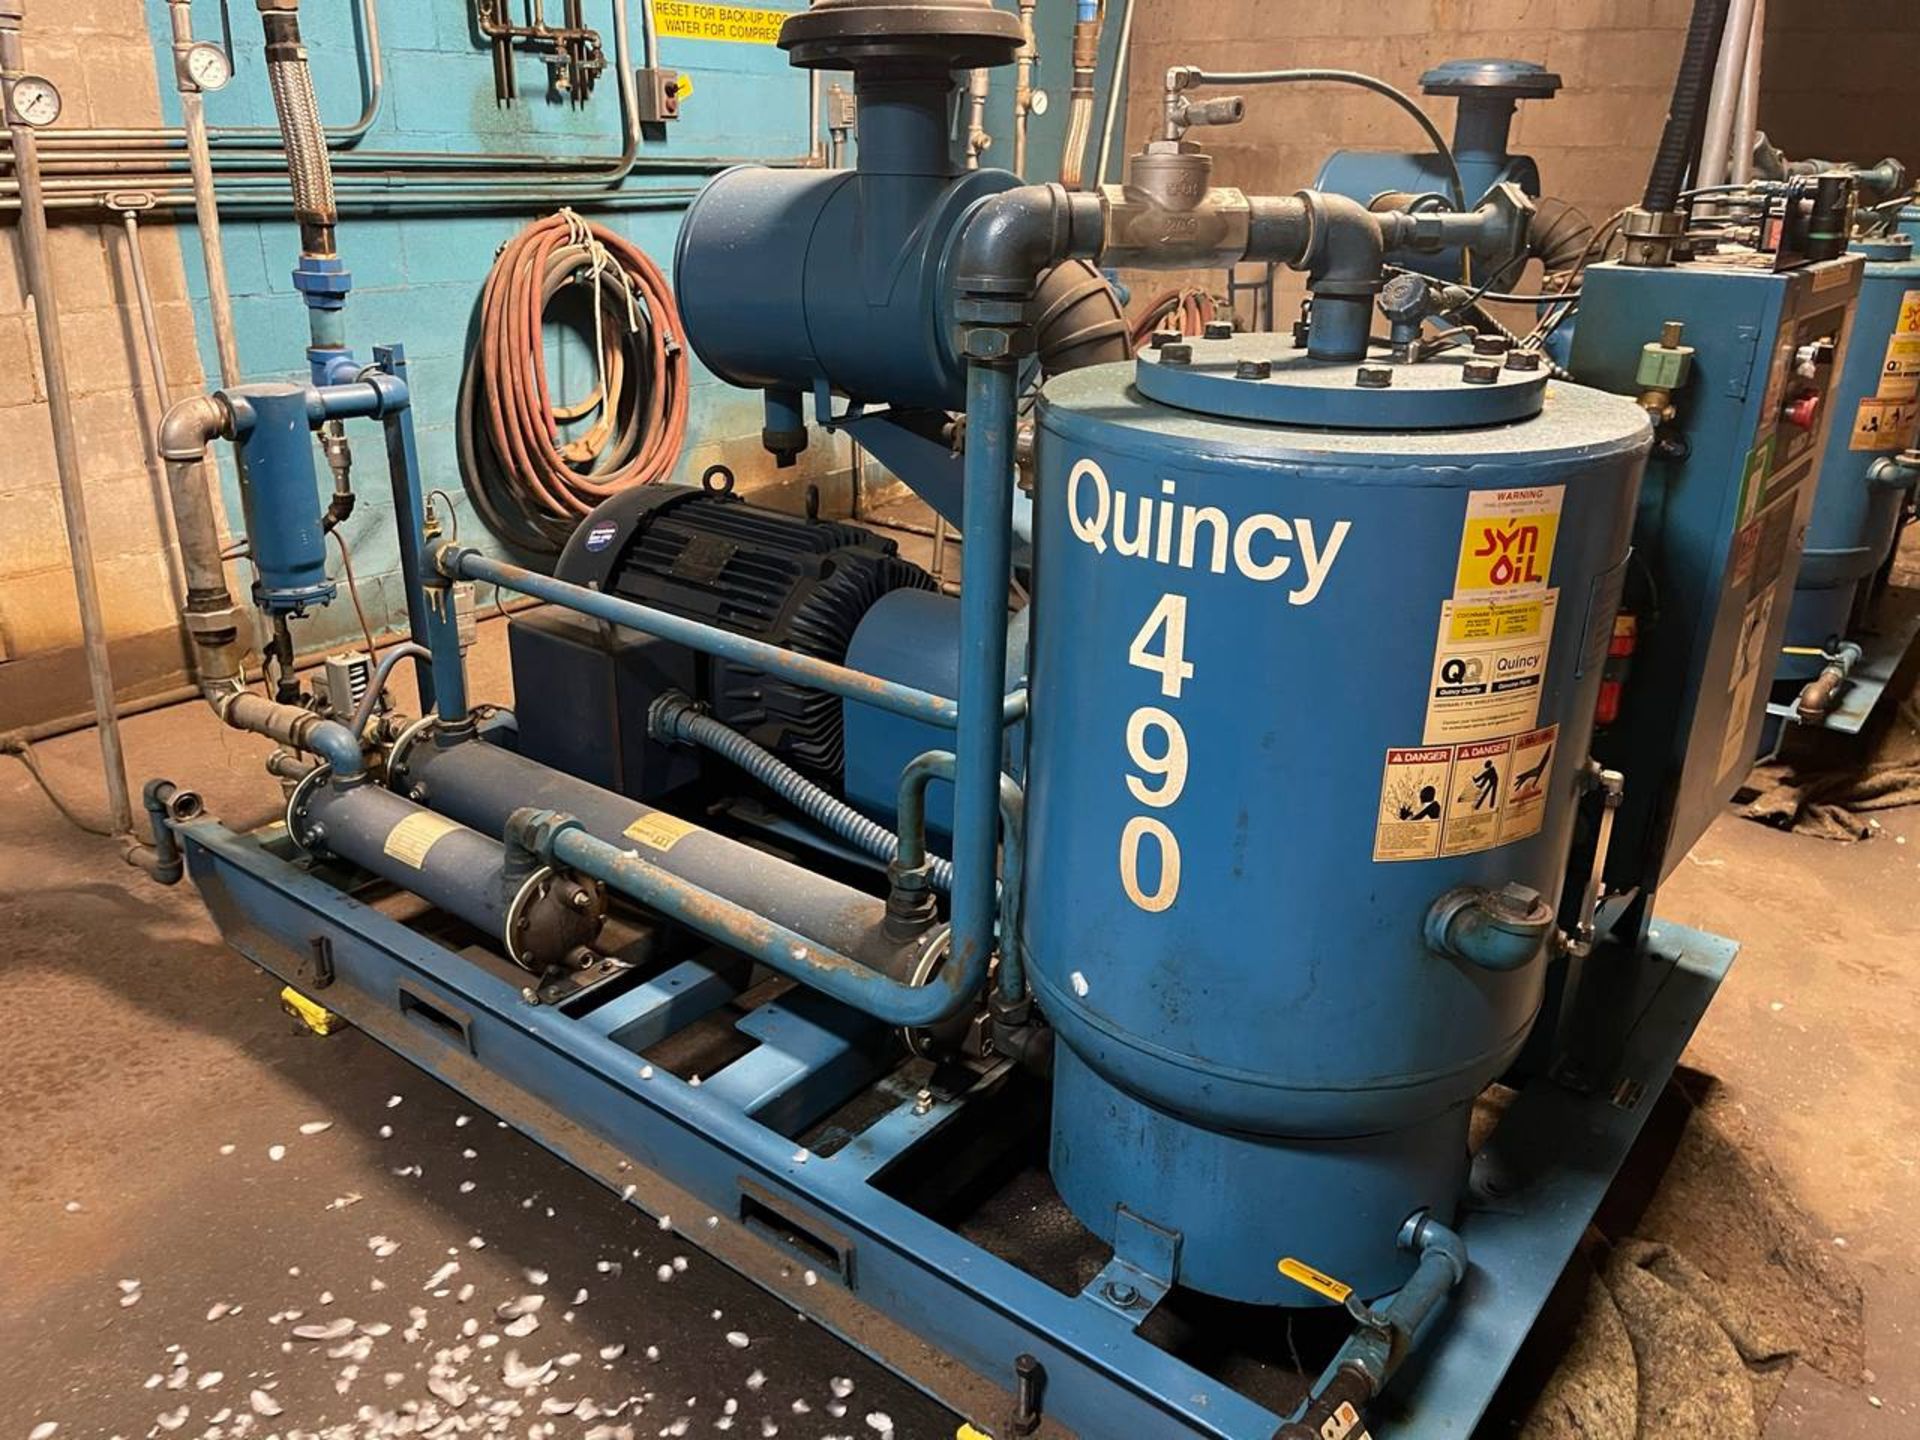 QUINCY 490 100 HP ROTARY SCREW AIR COMPRESSOR - Image 2 of 3